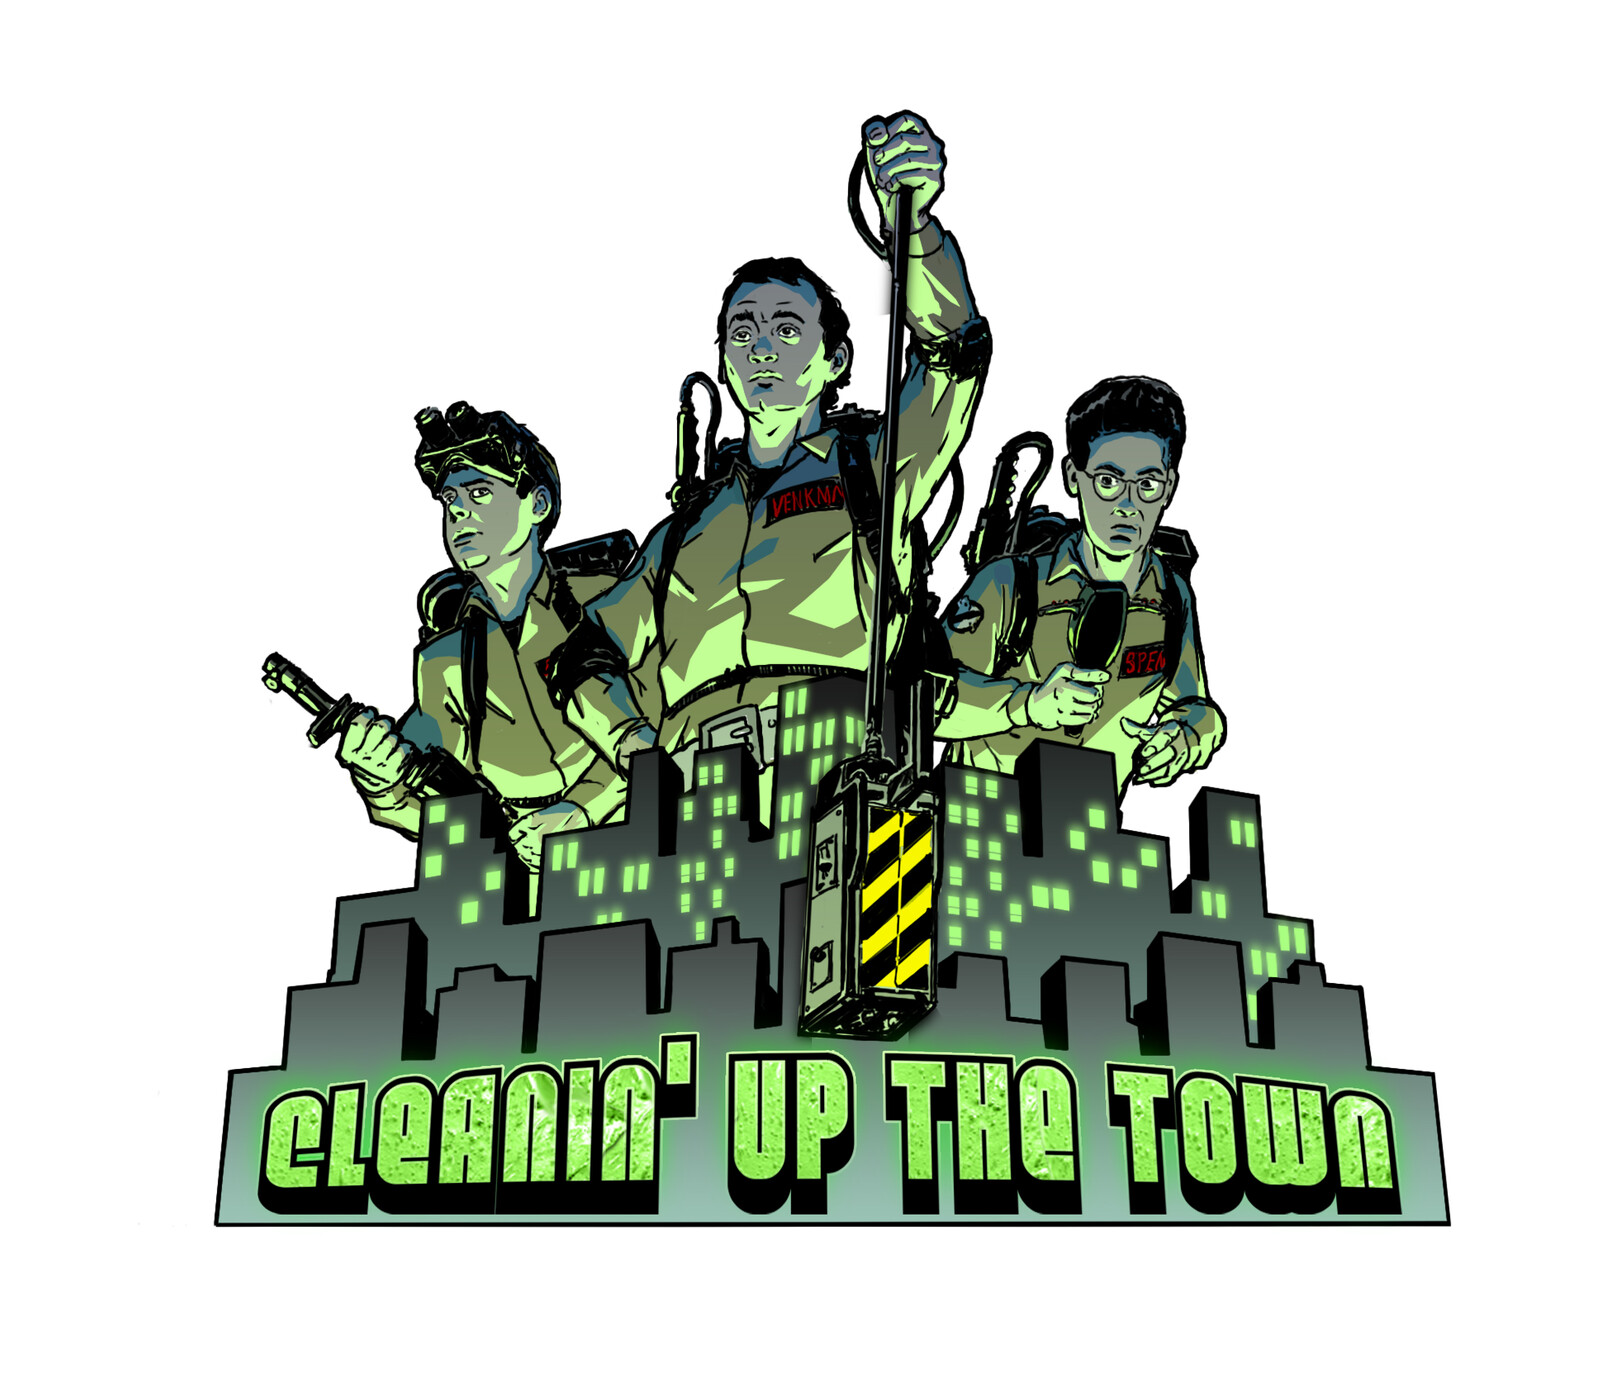 Ghostbusters Bonus Game Logo 2
My biggest regret is not putting Winston on here. 